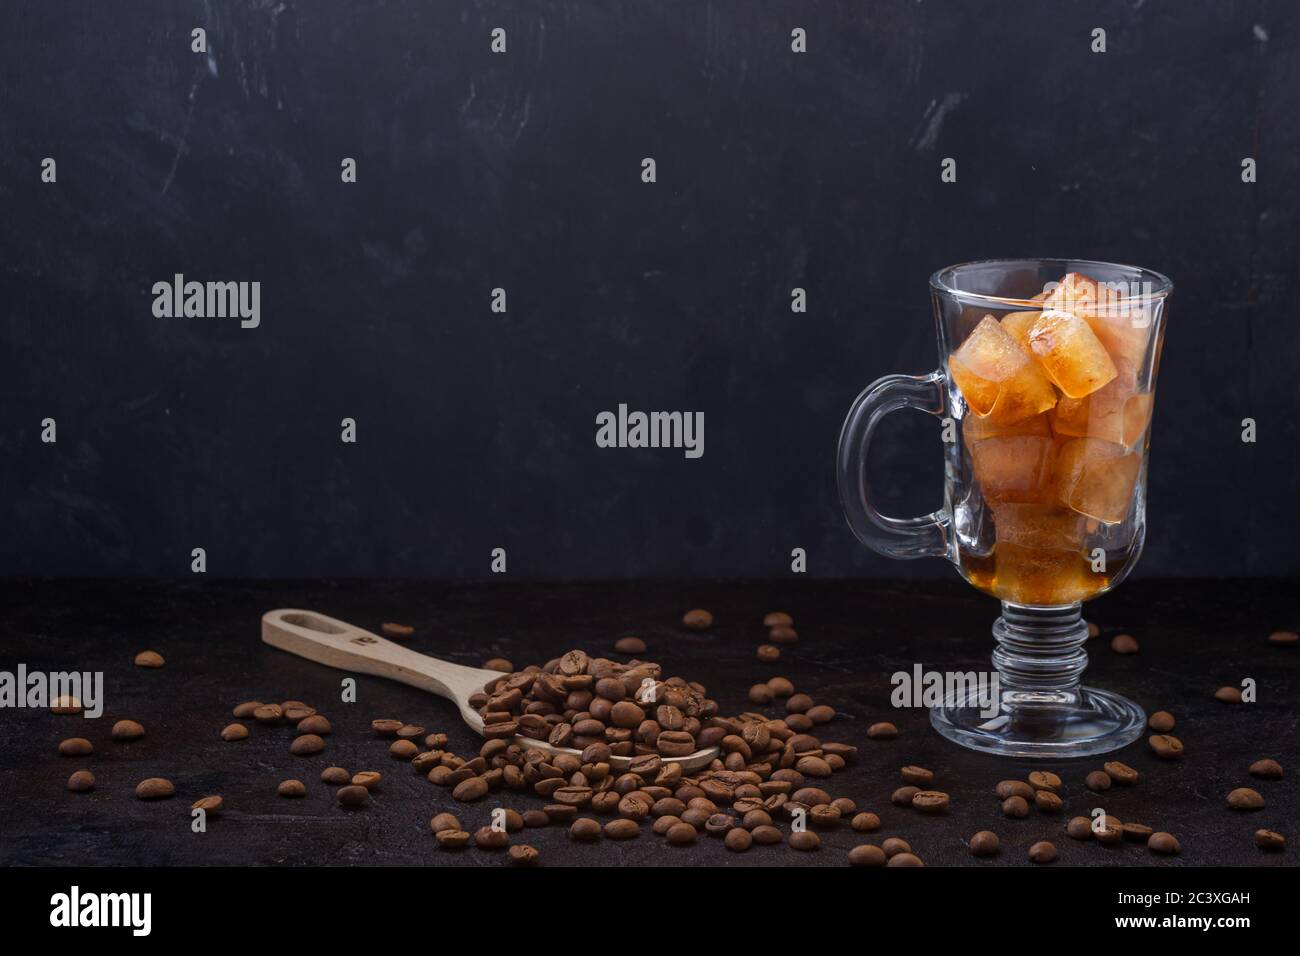 Frozen coffee ice cubes in a glass before pouring coffee Stock Photo